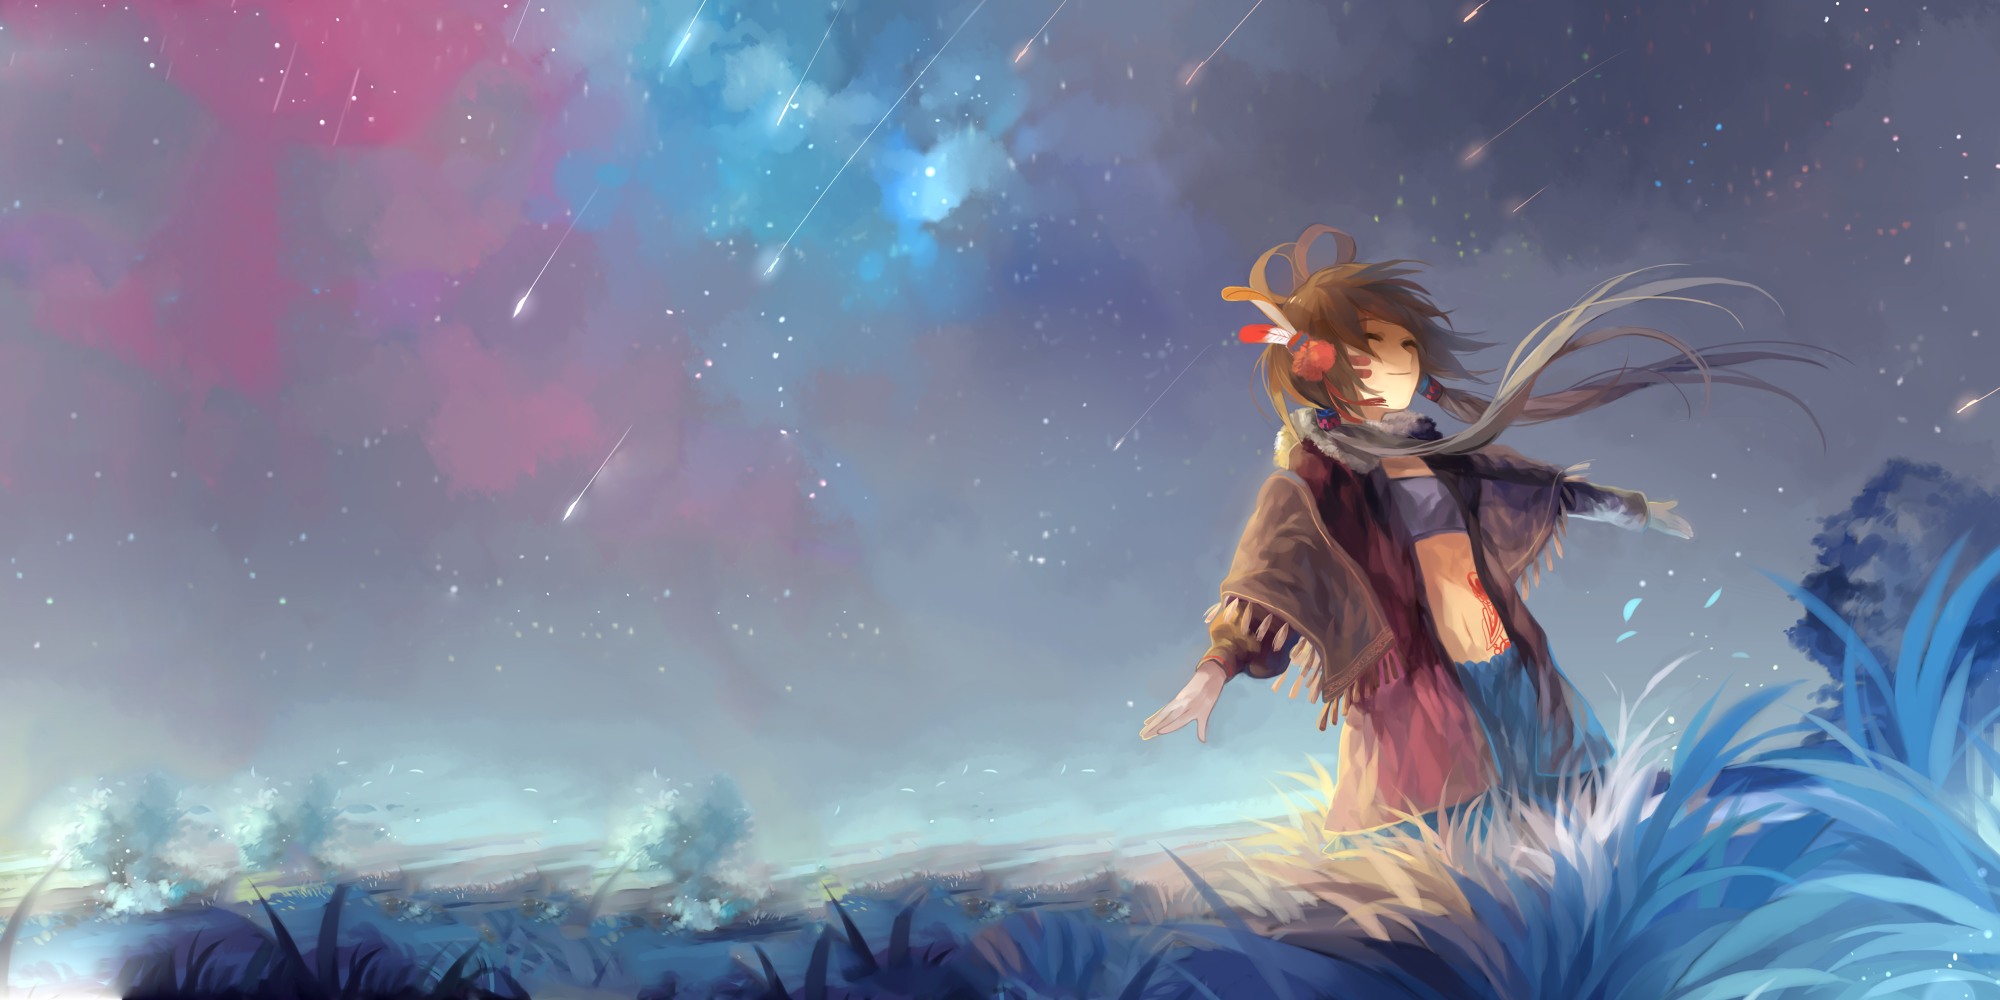 happy face, #Luo Tianyi, #closed eyes, #long hair, #manga, #dancing, #clouds, #sky, #grass, #Vocaloid, #stars,. Digital art fantasy, Anime, HD anime wallpaper